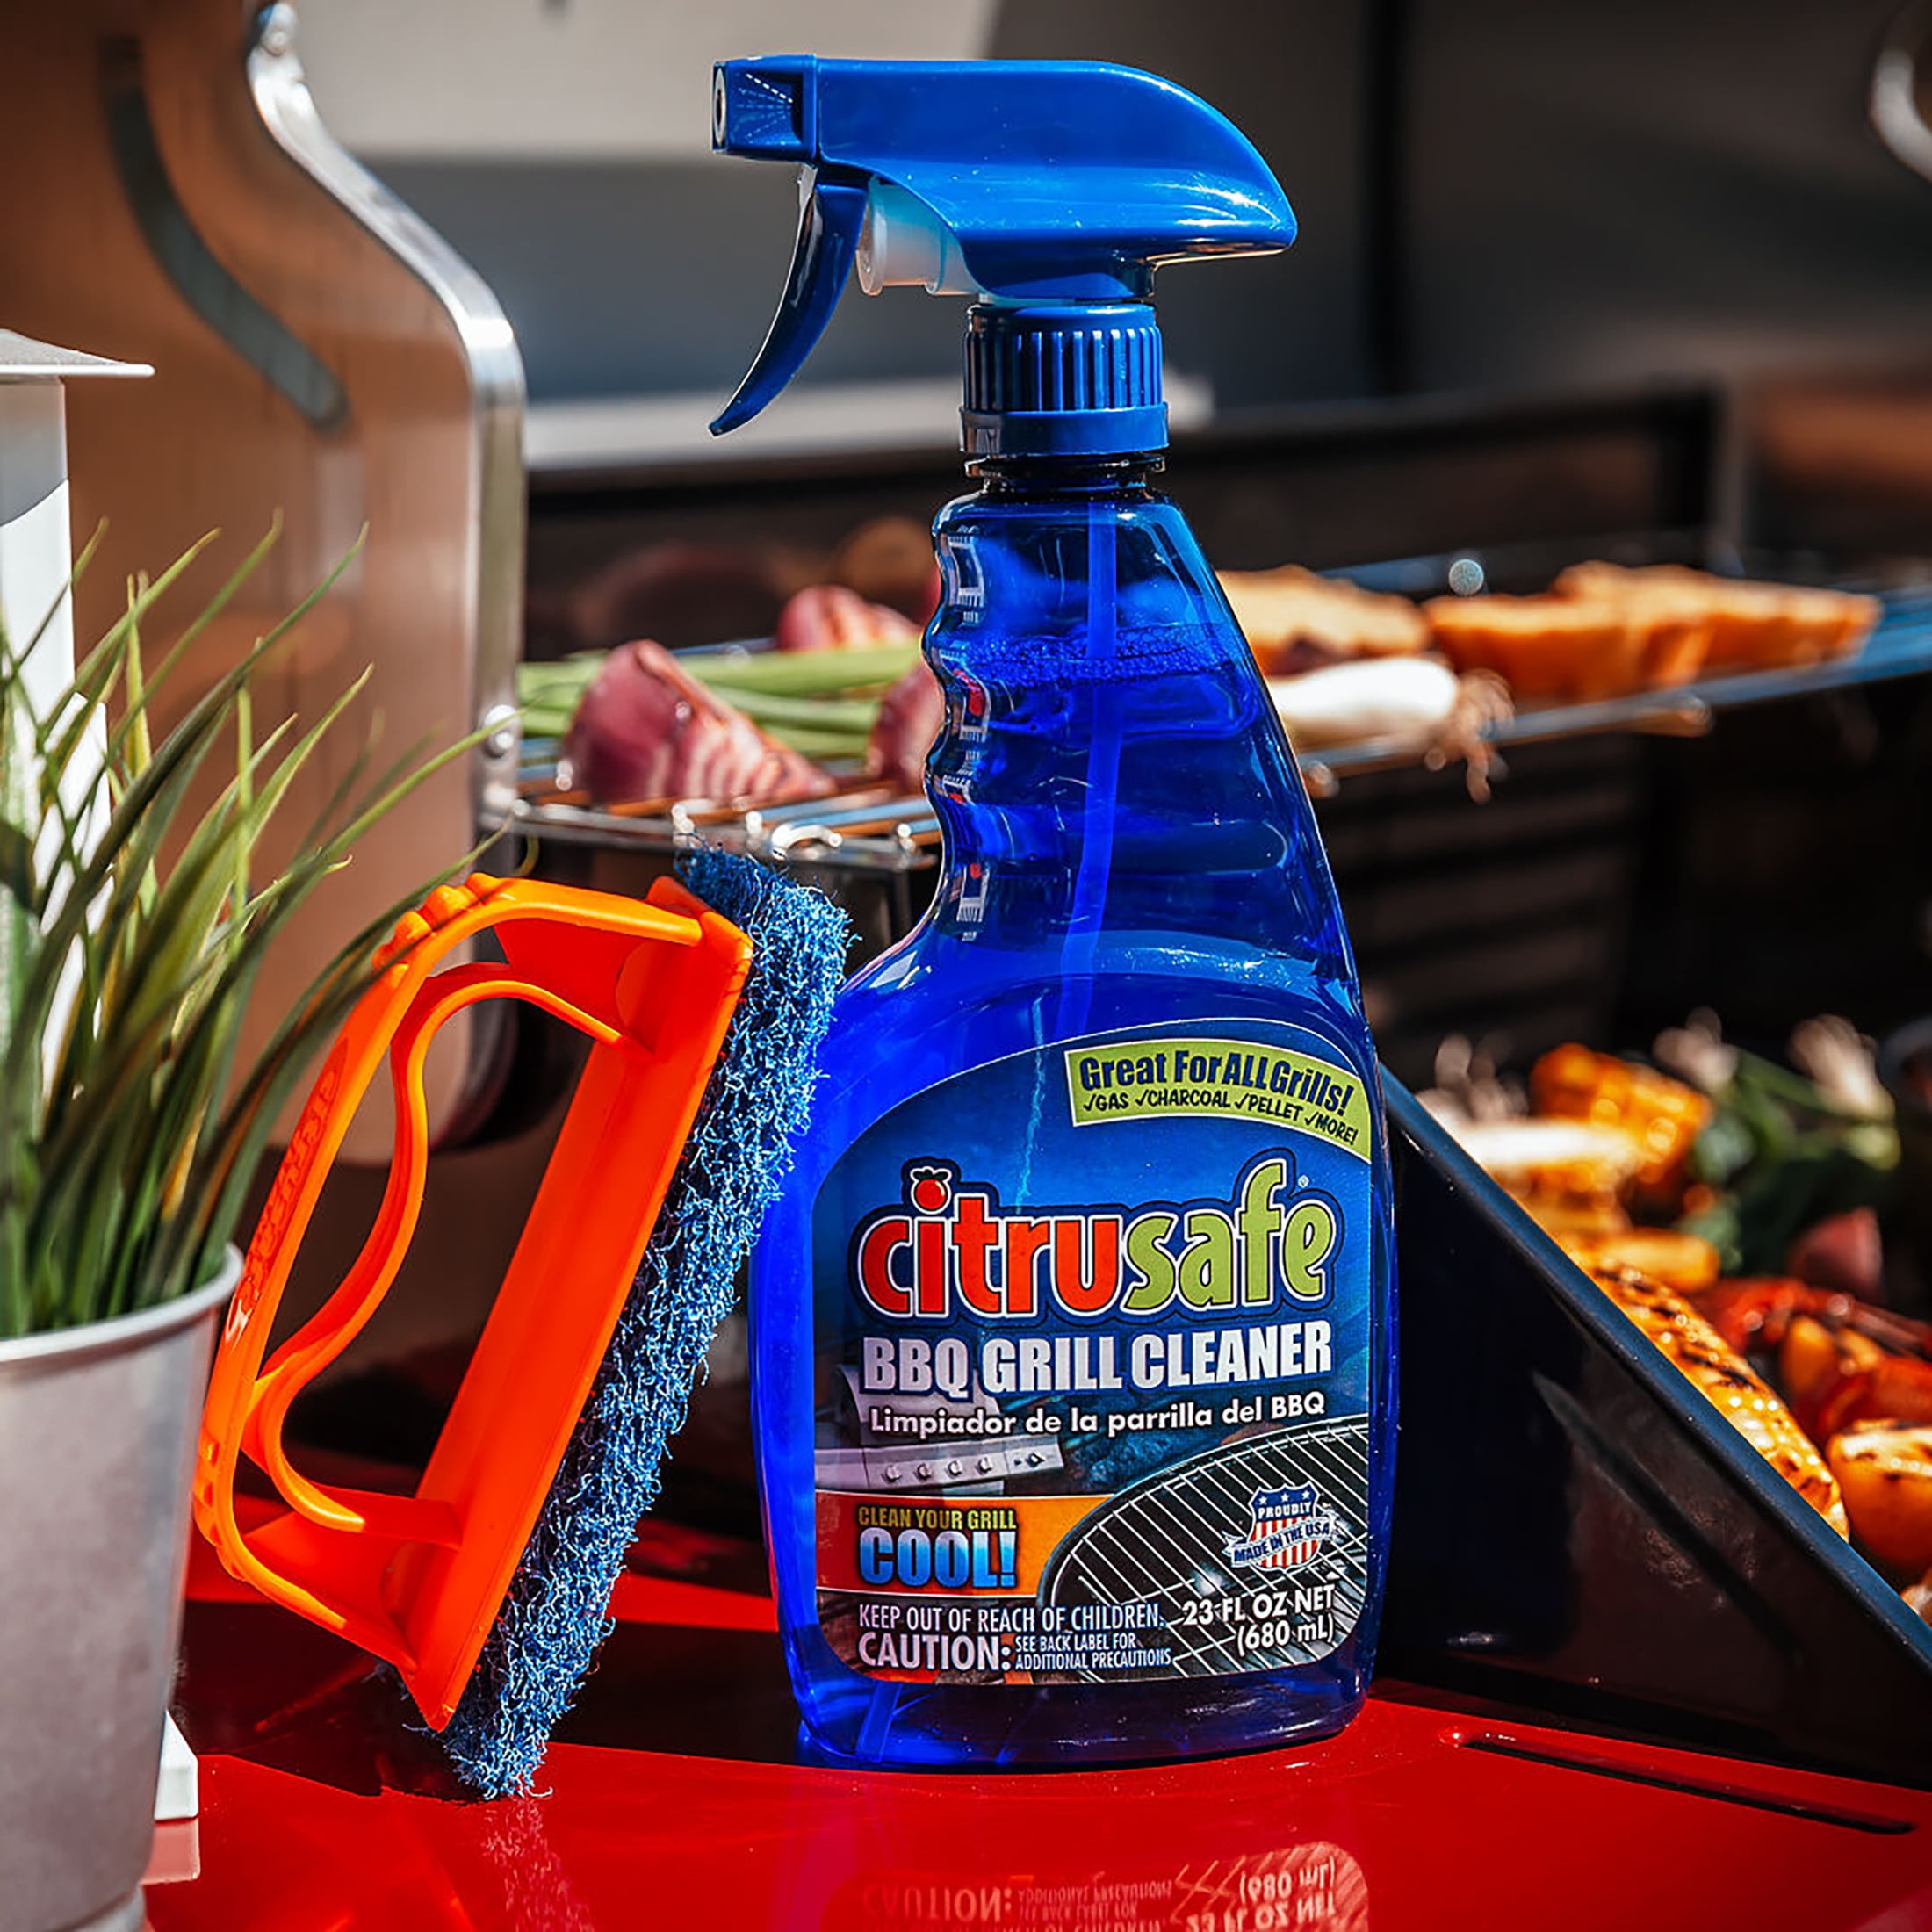 CitruSafe® BBQ Grill Cleaner